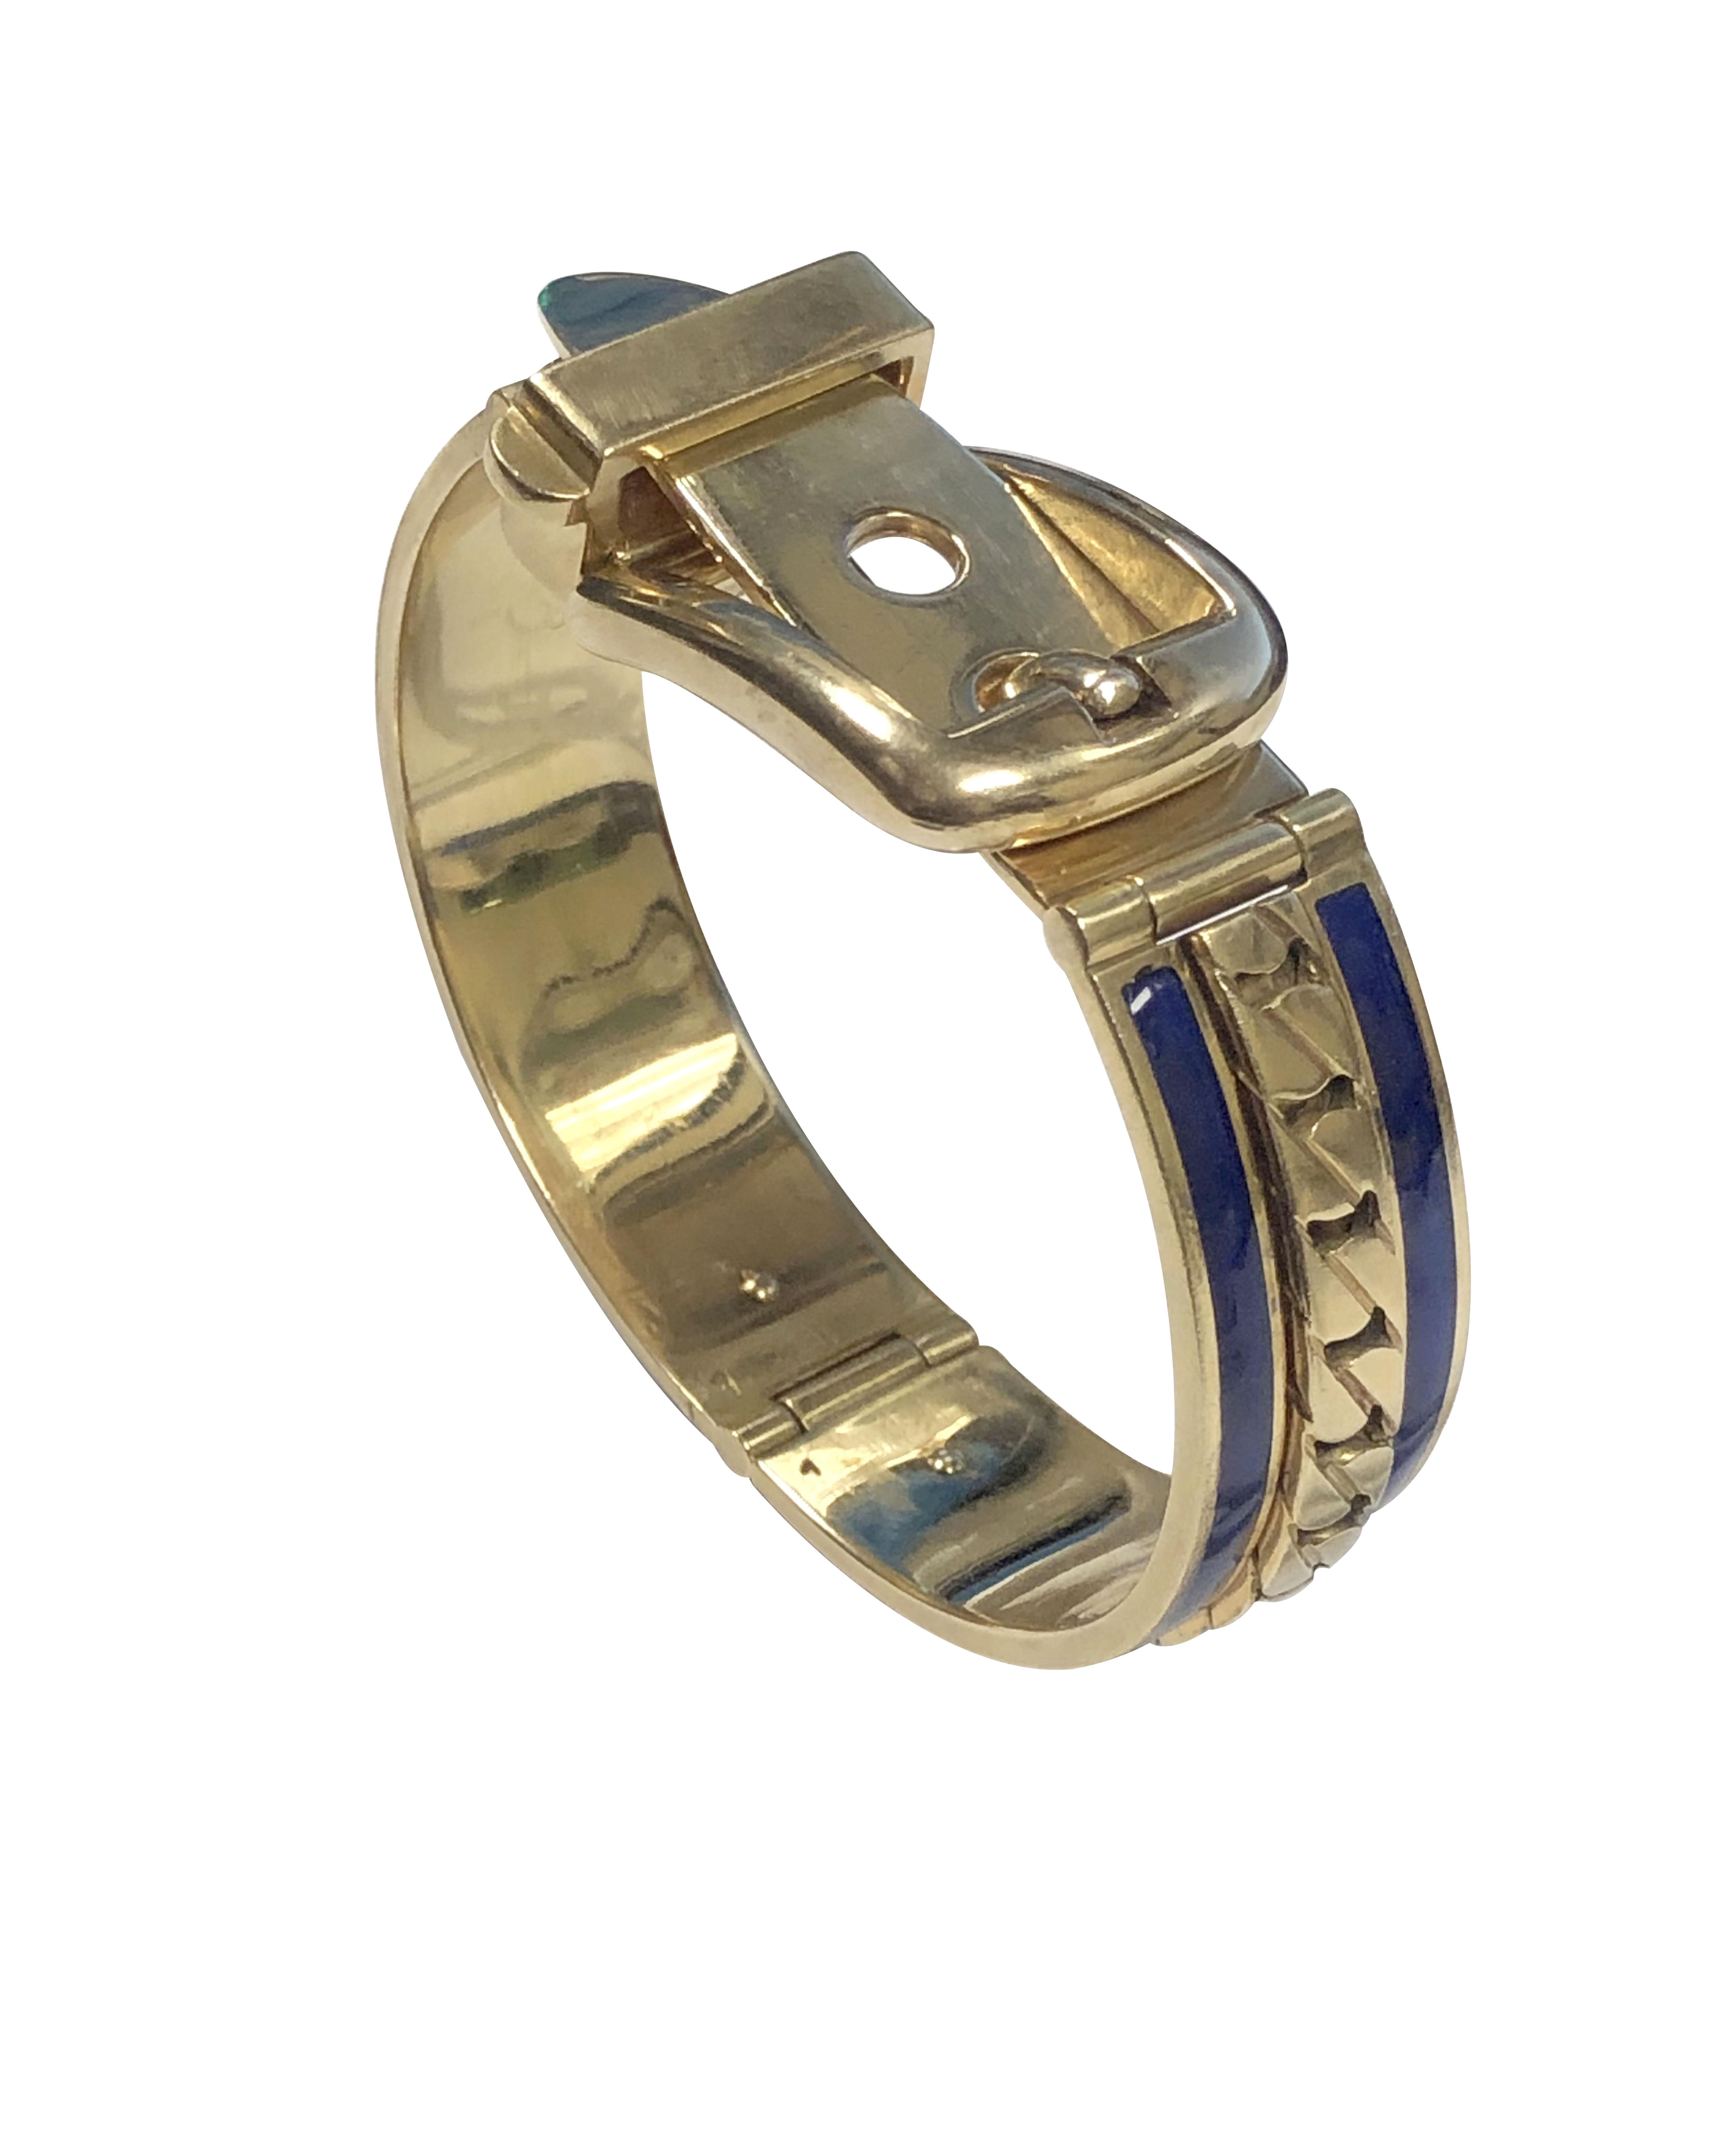 Circa 1970 Gucci Italy 18K Yellow Gold Buckle, Bangle Bracelet, measuring 9/16 inch wide and weighing 87.6 Grams. Having a center raise section of flat link chain with Cobalt Blue Enamel on either side. Wrist Size / Measurement 6 inches and is